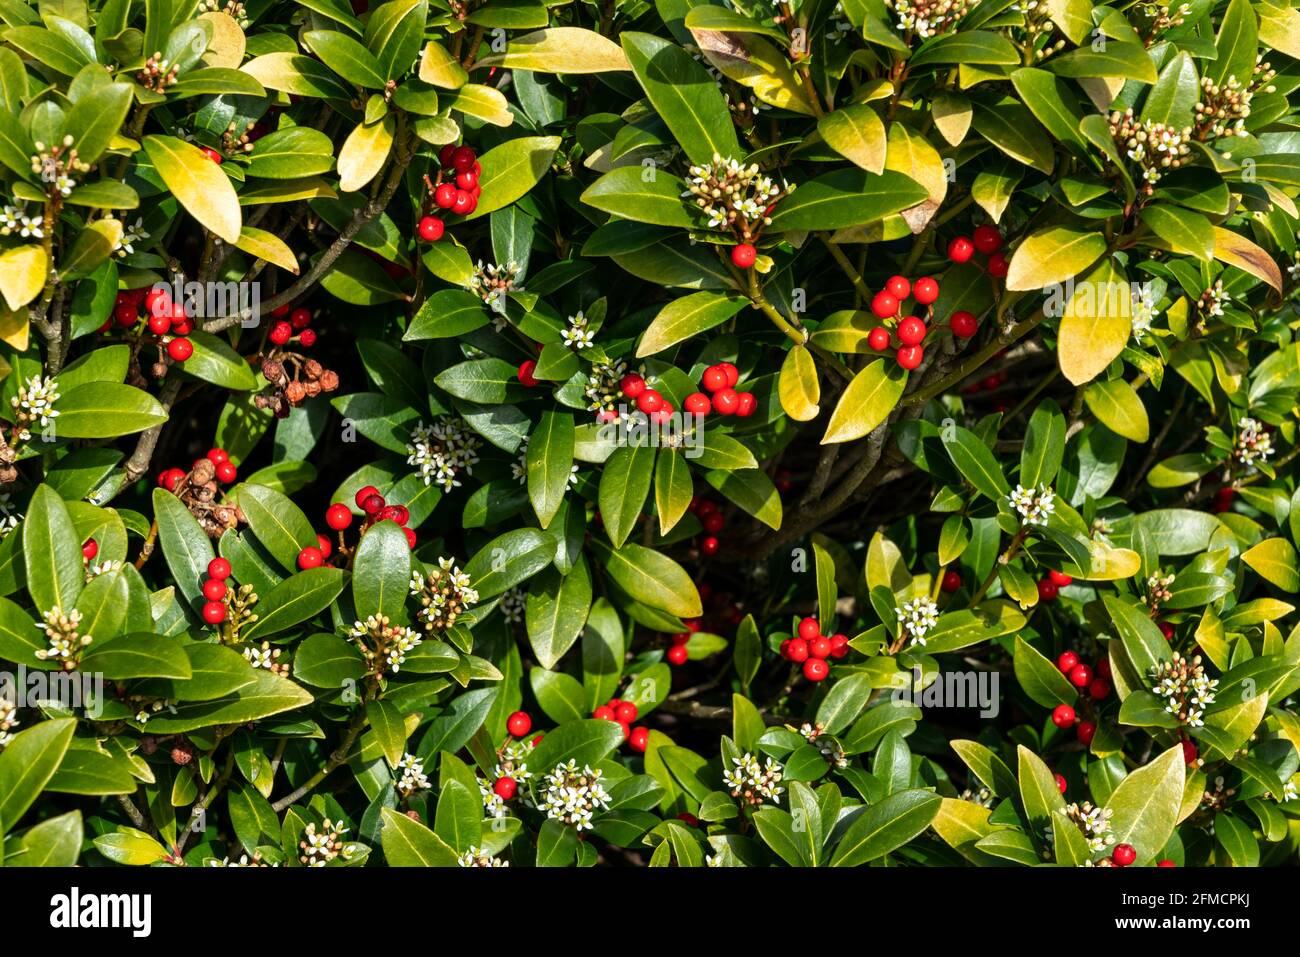 Skimmia japonica subsp reevesiana a spring flower shrub plant with red springtime berries, stock photo image Stock Photo